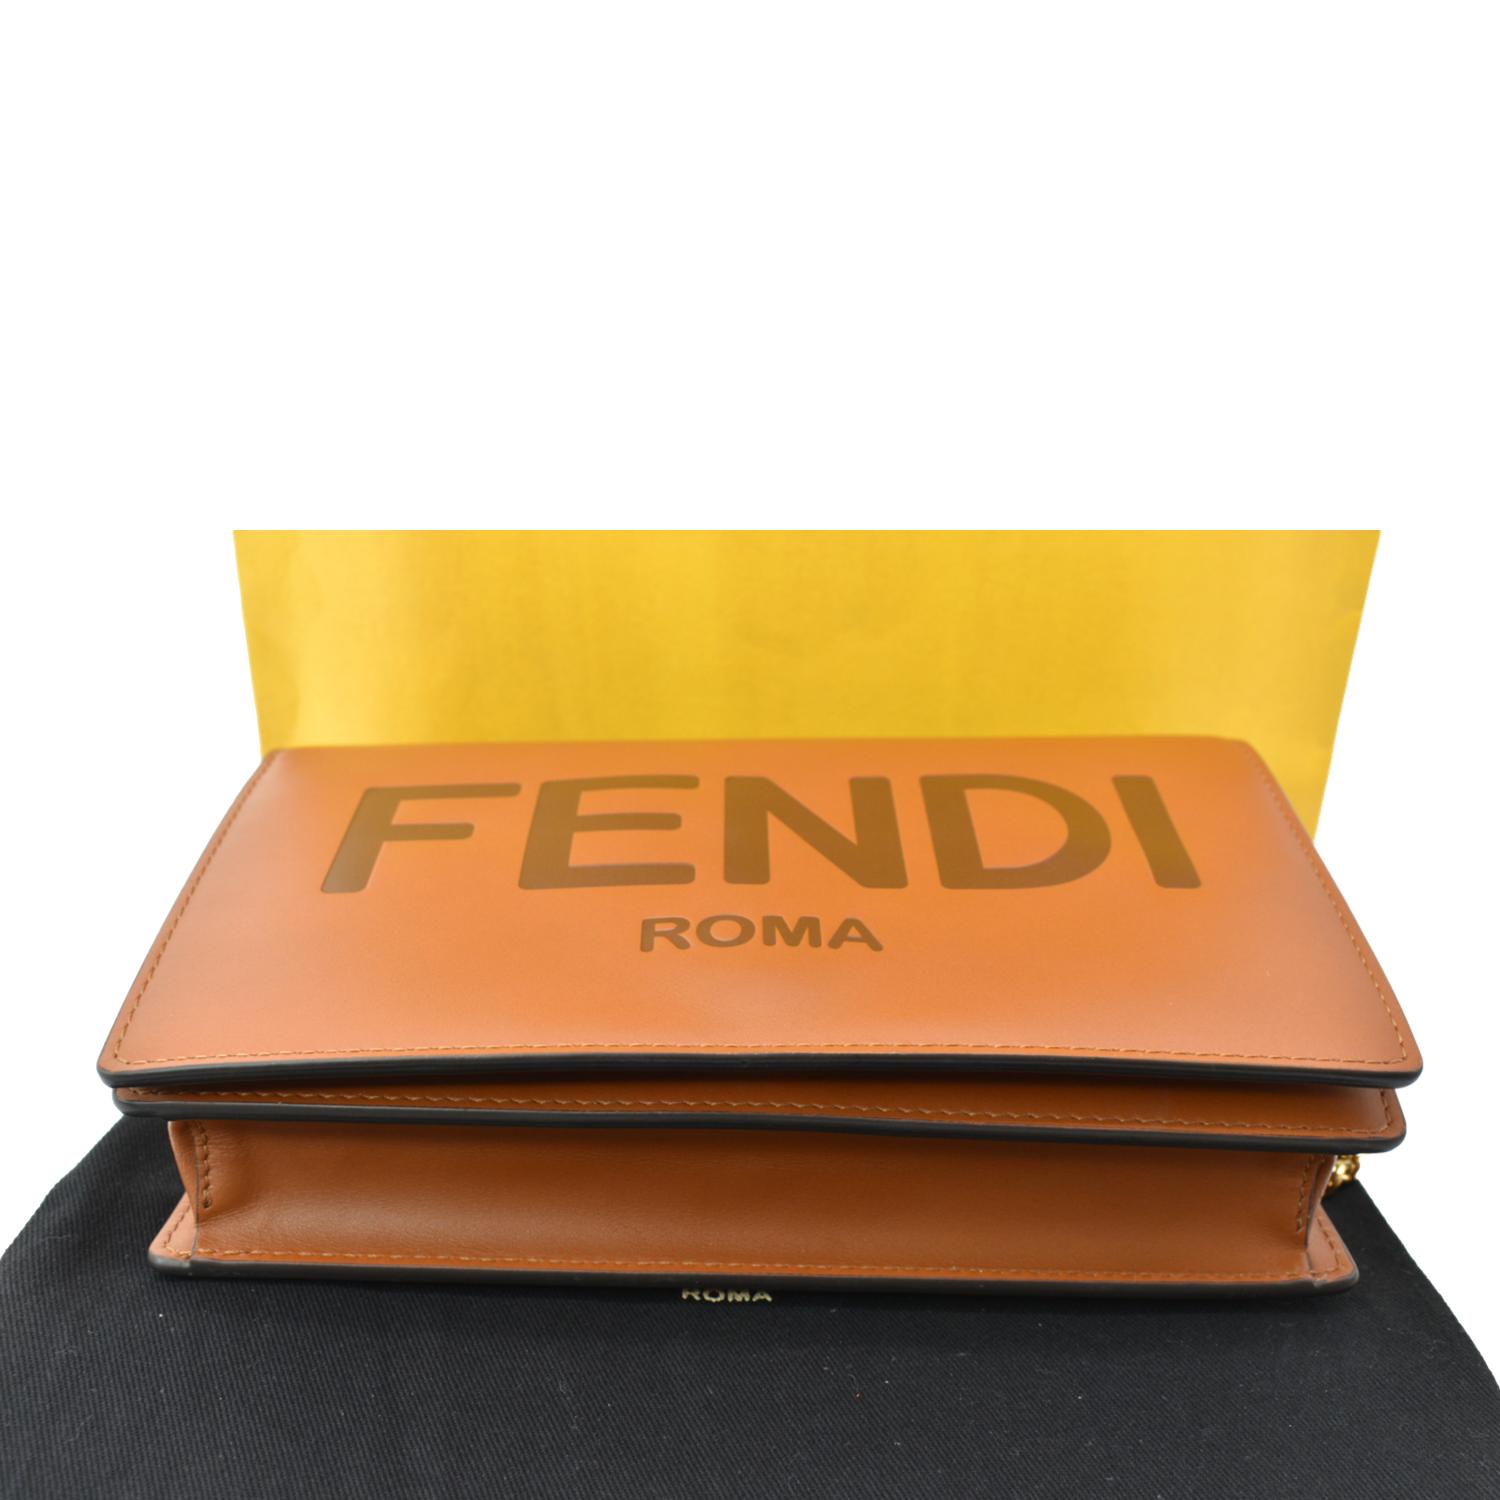 Fendi Roma Flat Pouch Large - Light grey leather pouch